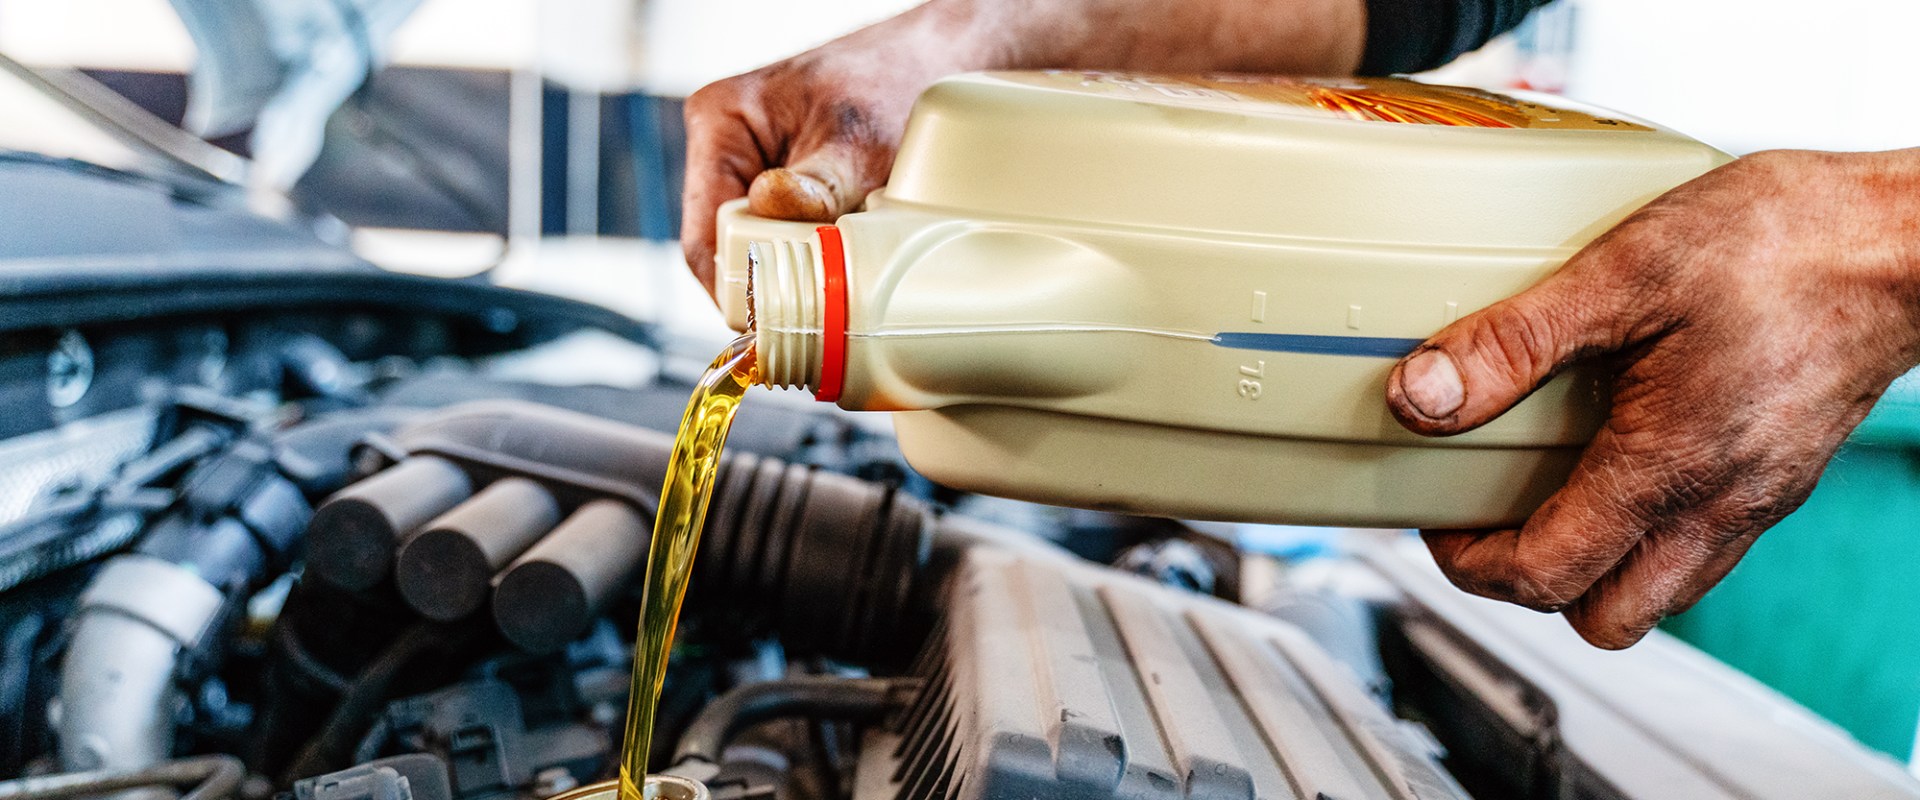 What are 4 things you will now look for when choosing an auto repair facility?